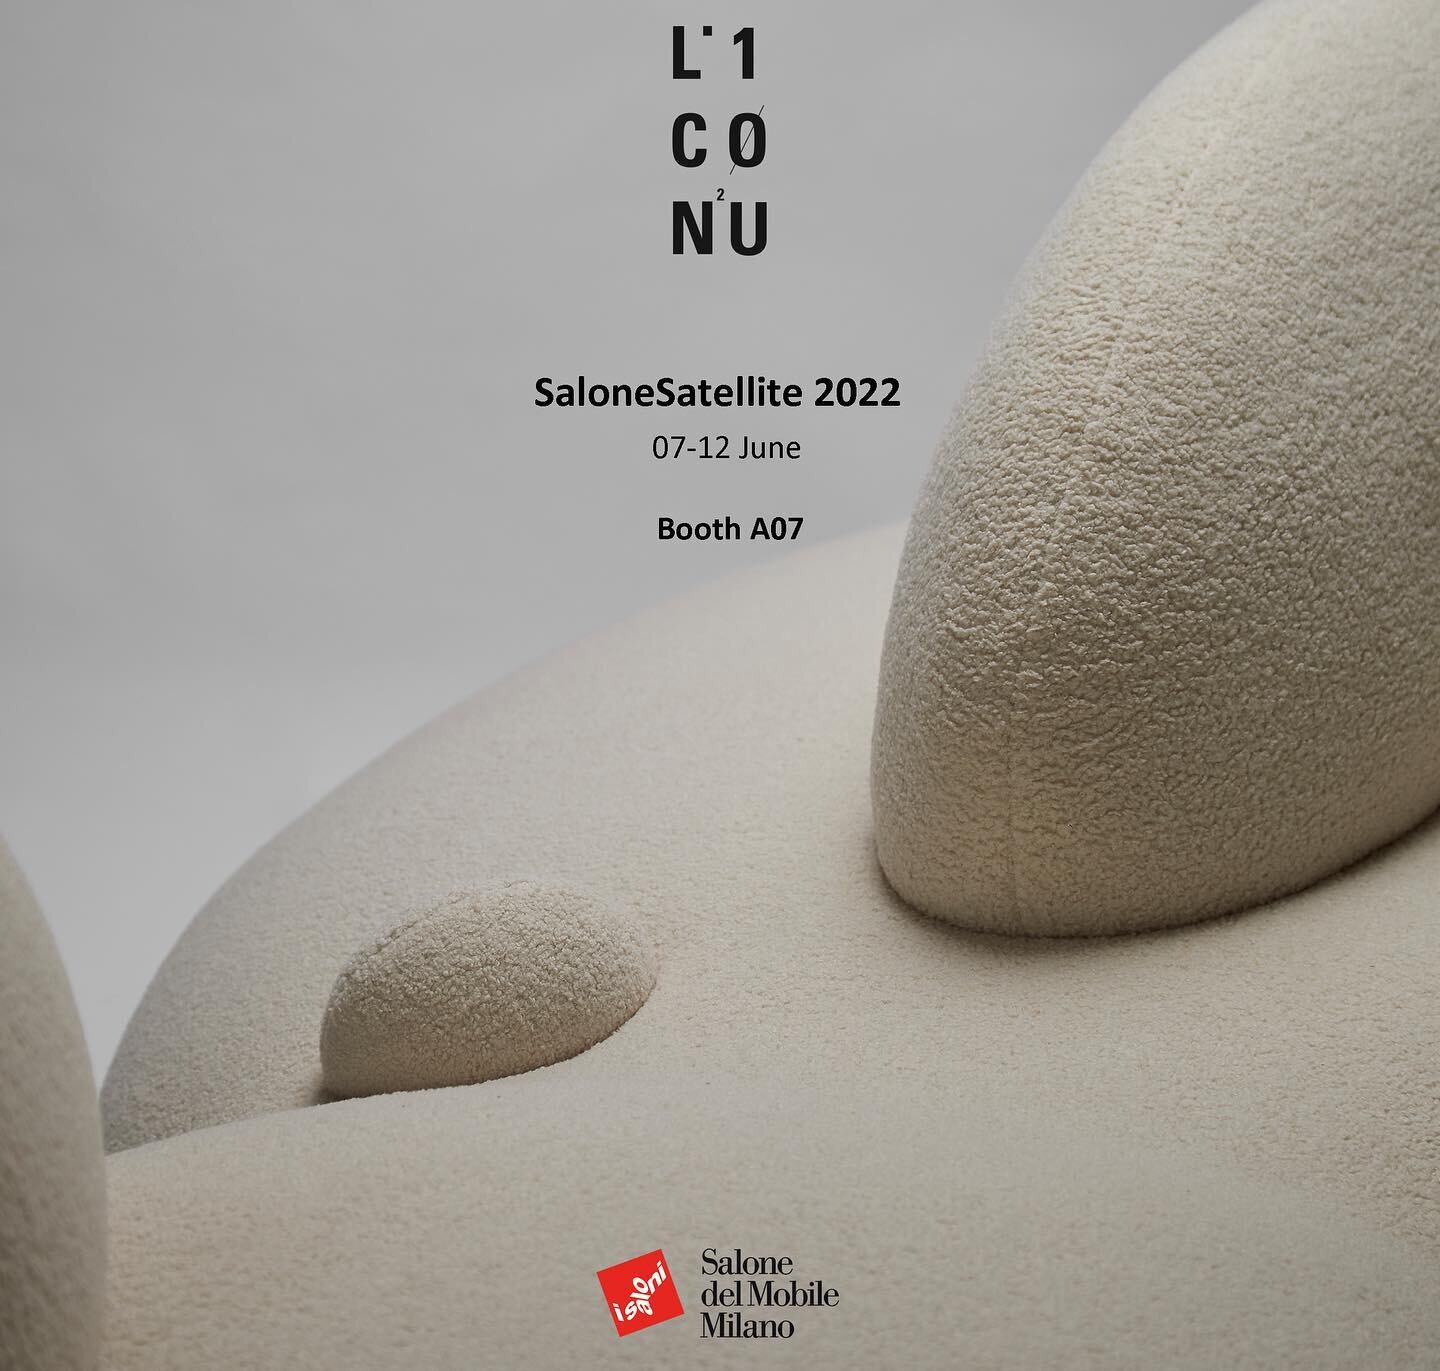 Thrilled to announce the official launch of L&rsquo;inconnu at Salone Del Mobile 2022 @isaloniofficial 
&bull;
&bull;
&bull;
From 07 till 12 of June  L&rsquo;inconnu will be unveiling its latest collection &ldquo;CACTI&rdquo; exclusively designed for